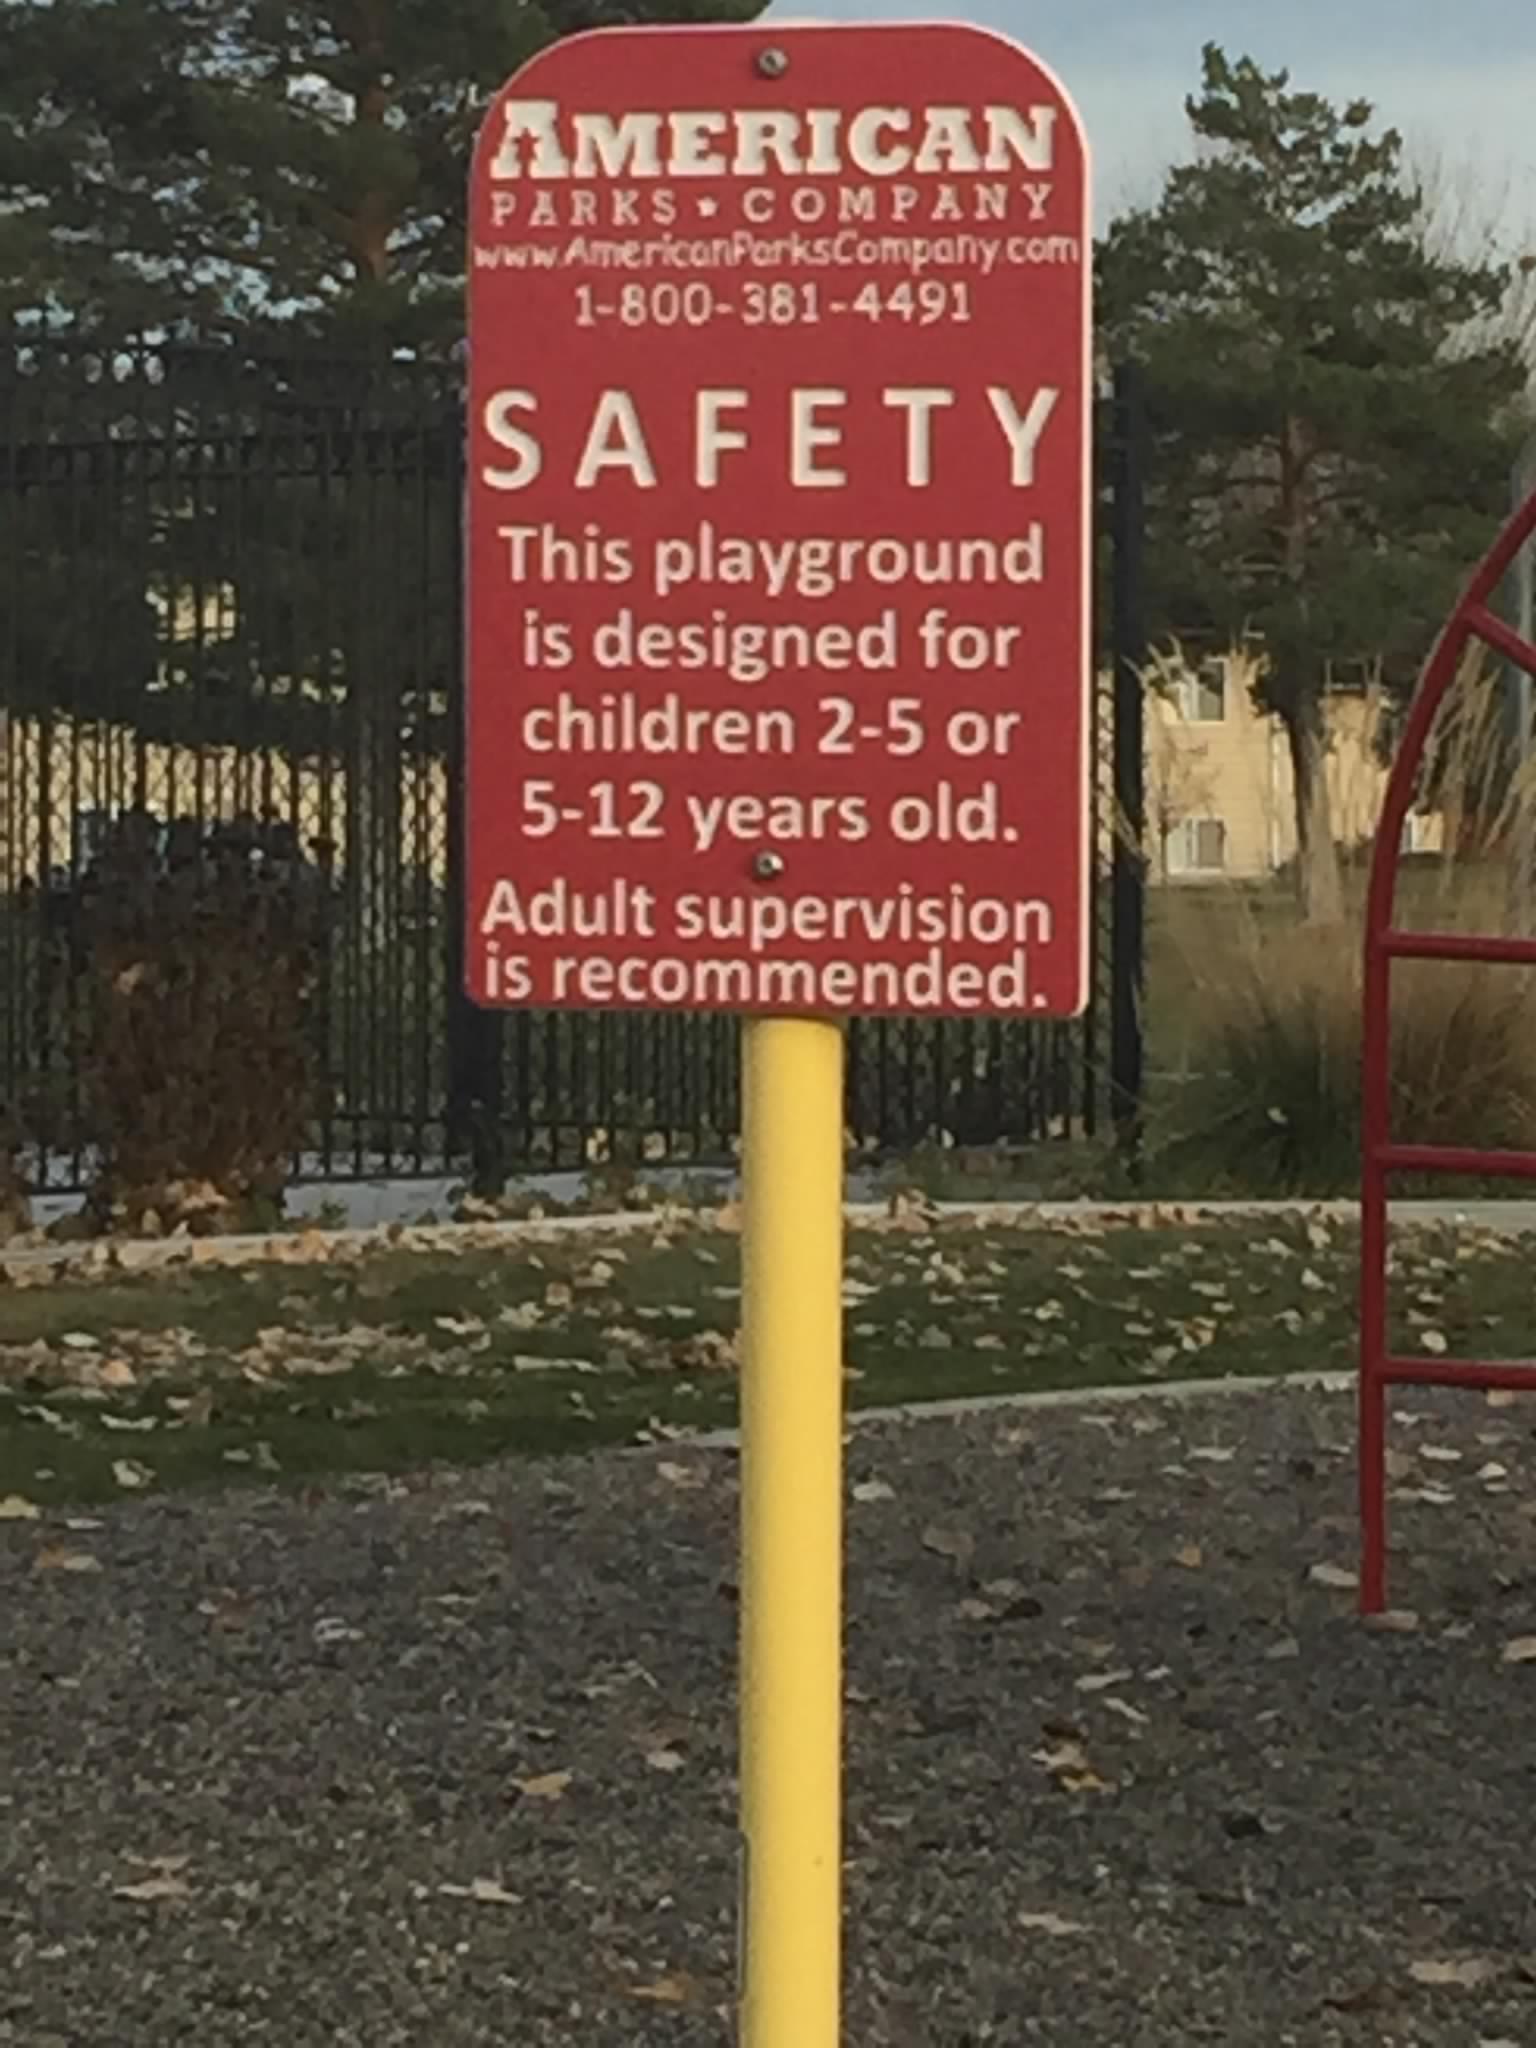 memes - street sign - American Parks Company www American Forkscompany com 18003814491 Safety This playground is designed for children 25 or 512 years old. Adult supervision is recommended.